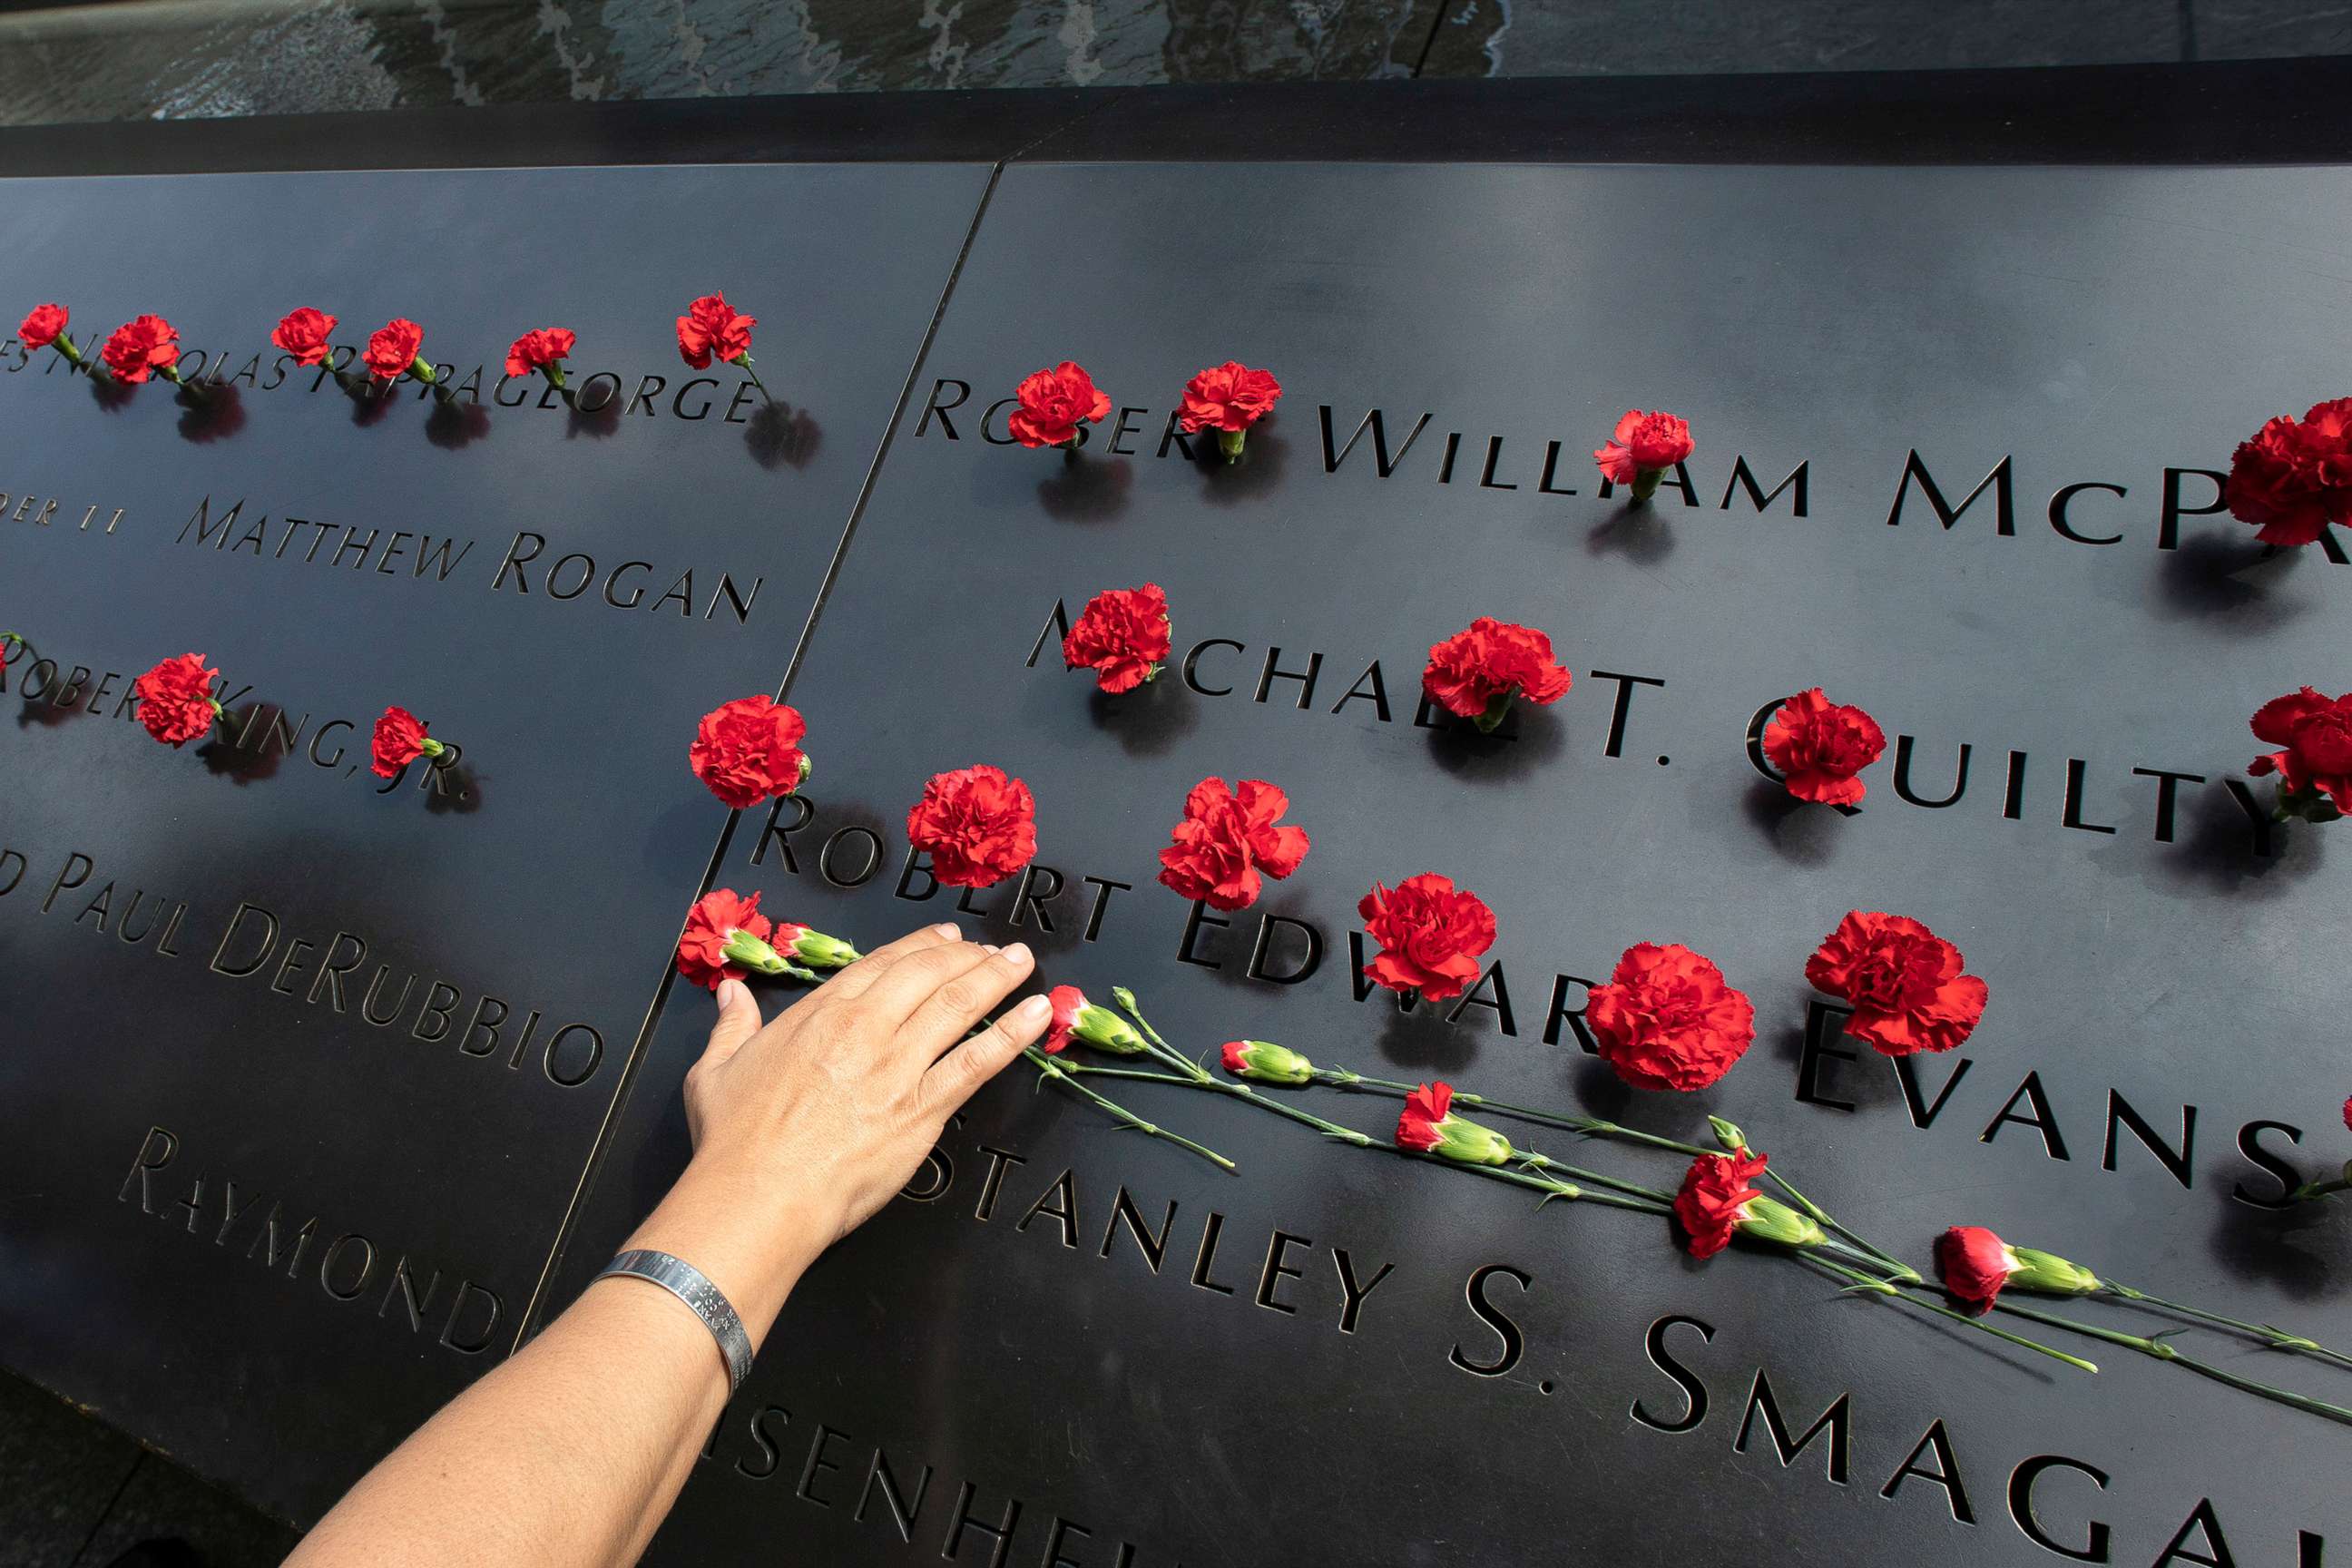 PHOTO: Norma Molina, of San Antonio, Texas, leaves flowers by the names of firefighters from Engine 33 at the September 11 Memorial, Sept. 9, 2019, in New York.